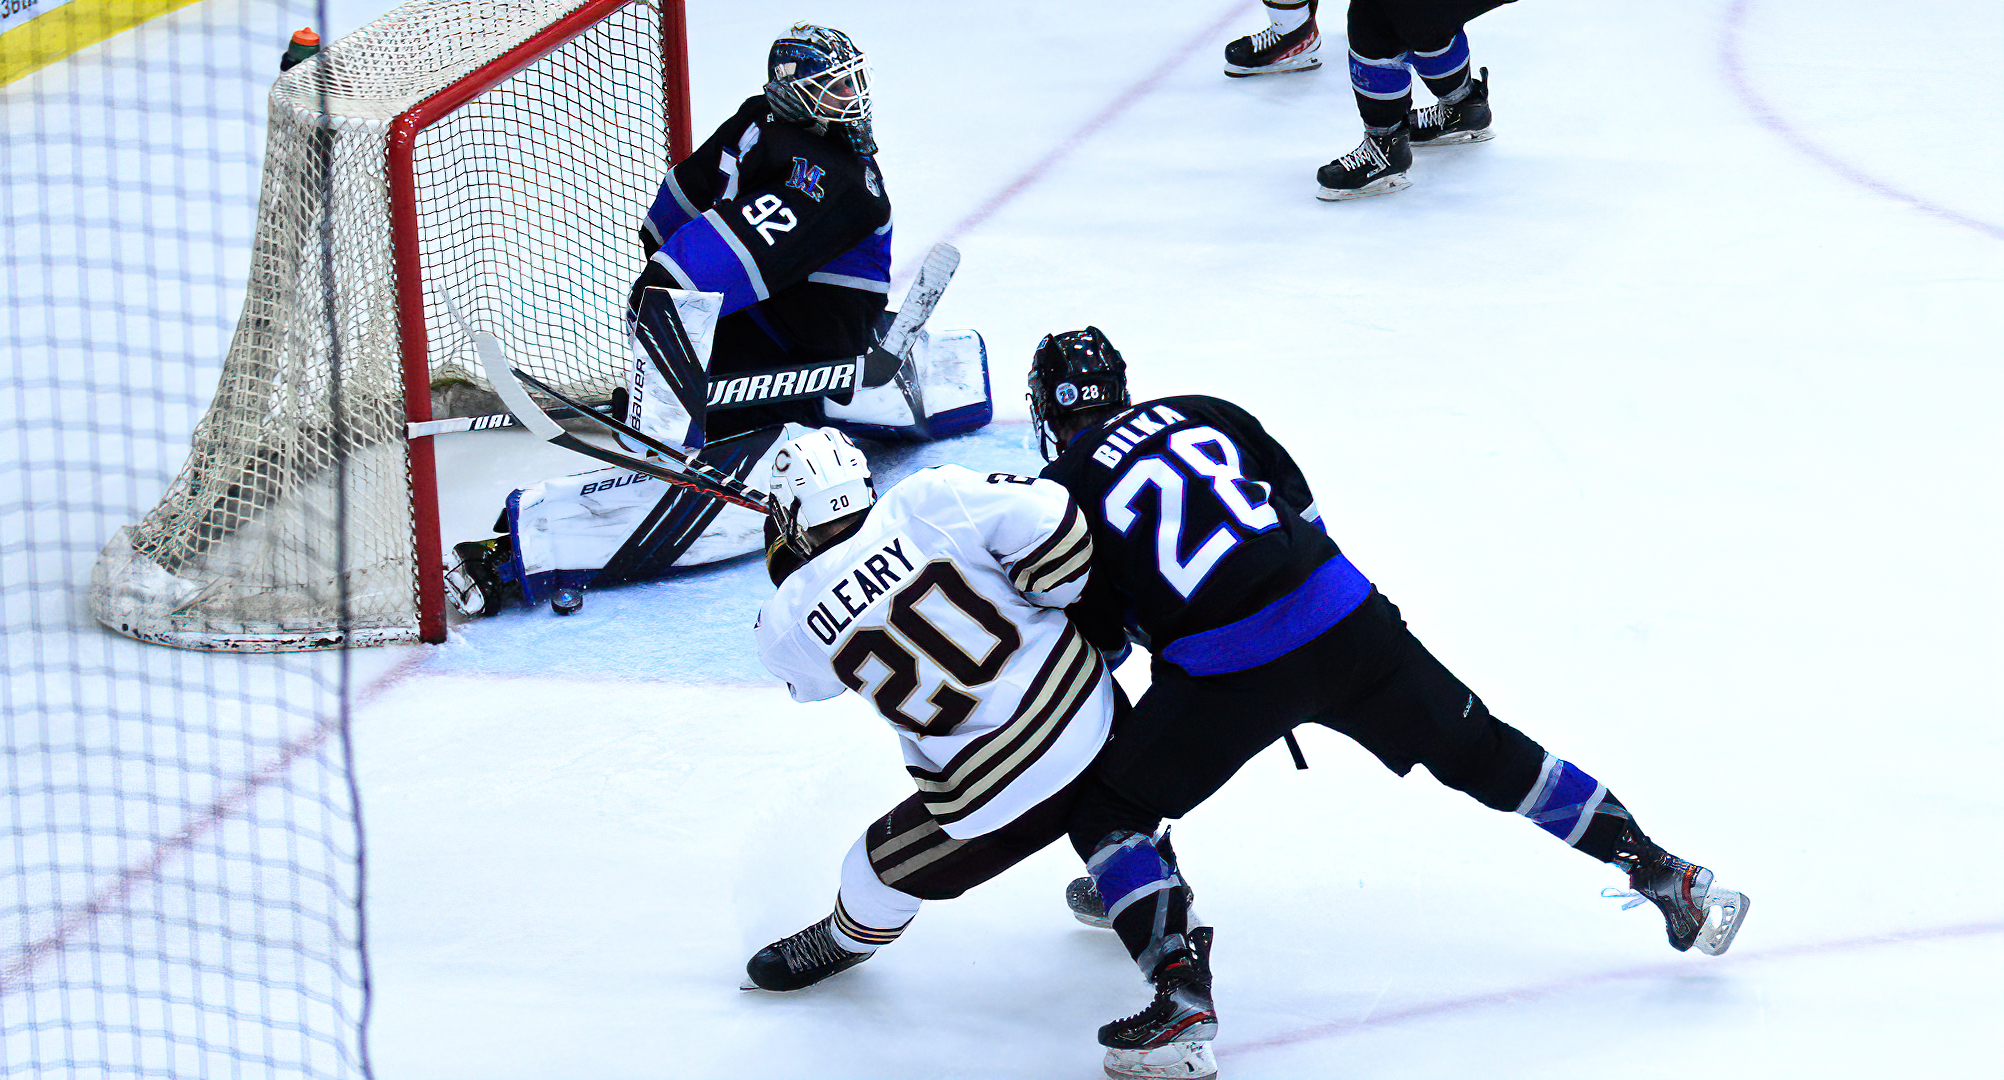 Hanson O'Leary scored one of the Cobbers' four goals in their season opener at Marian.